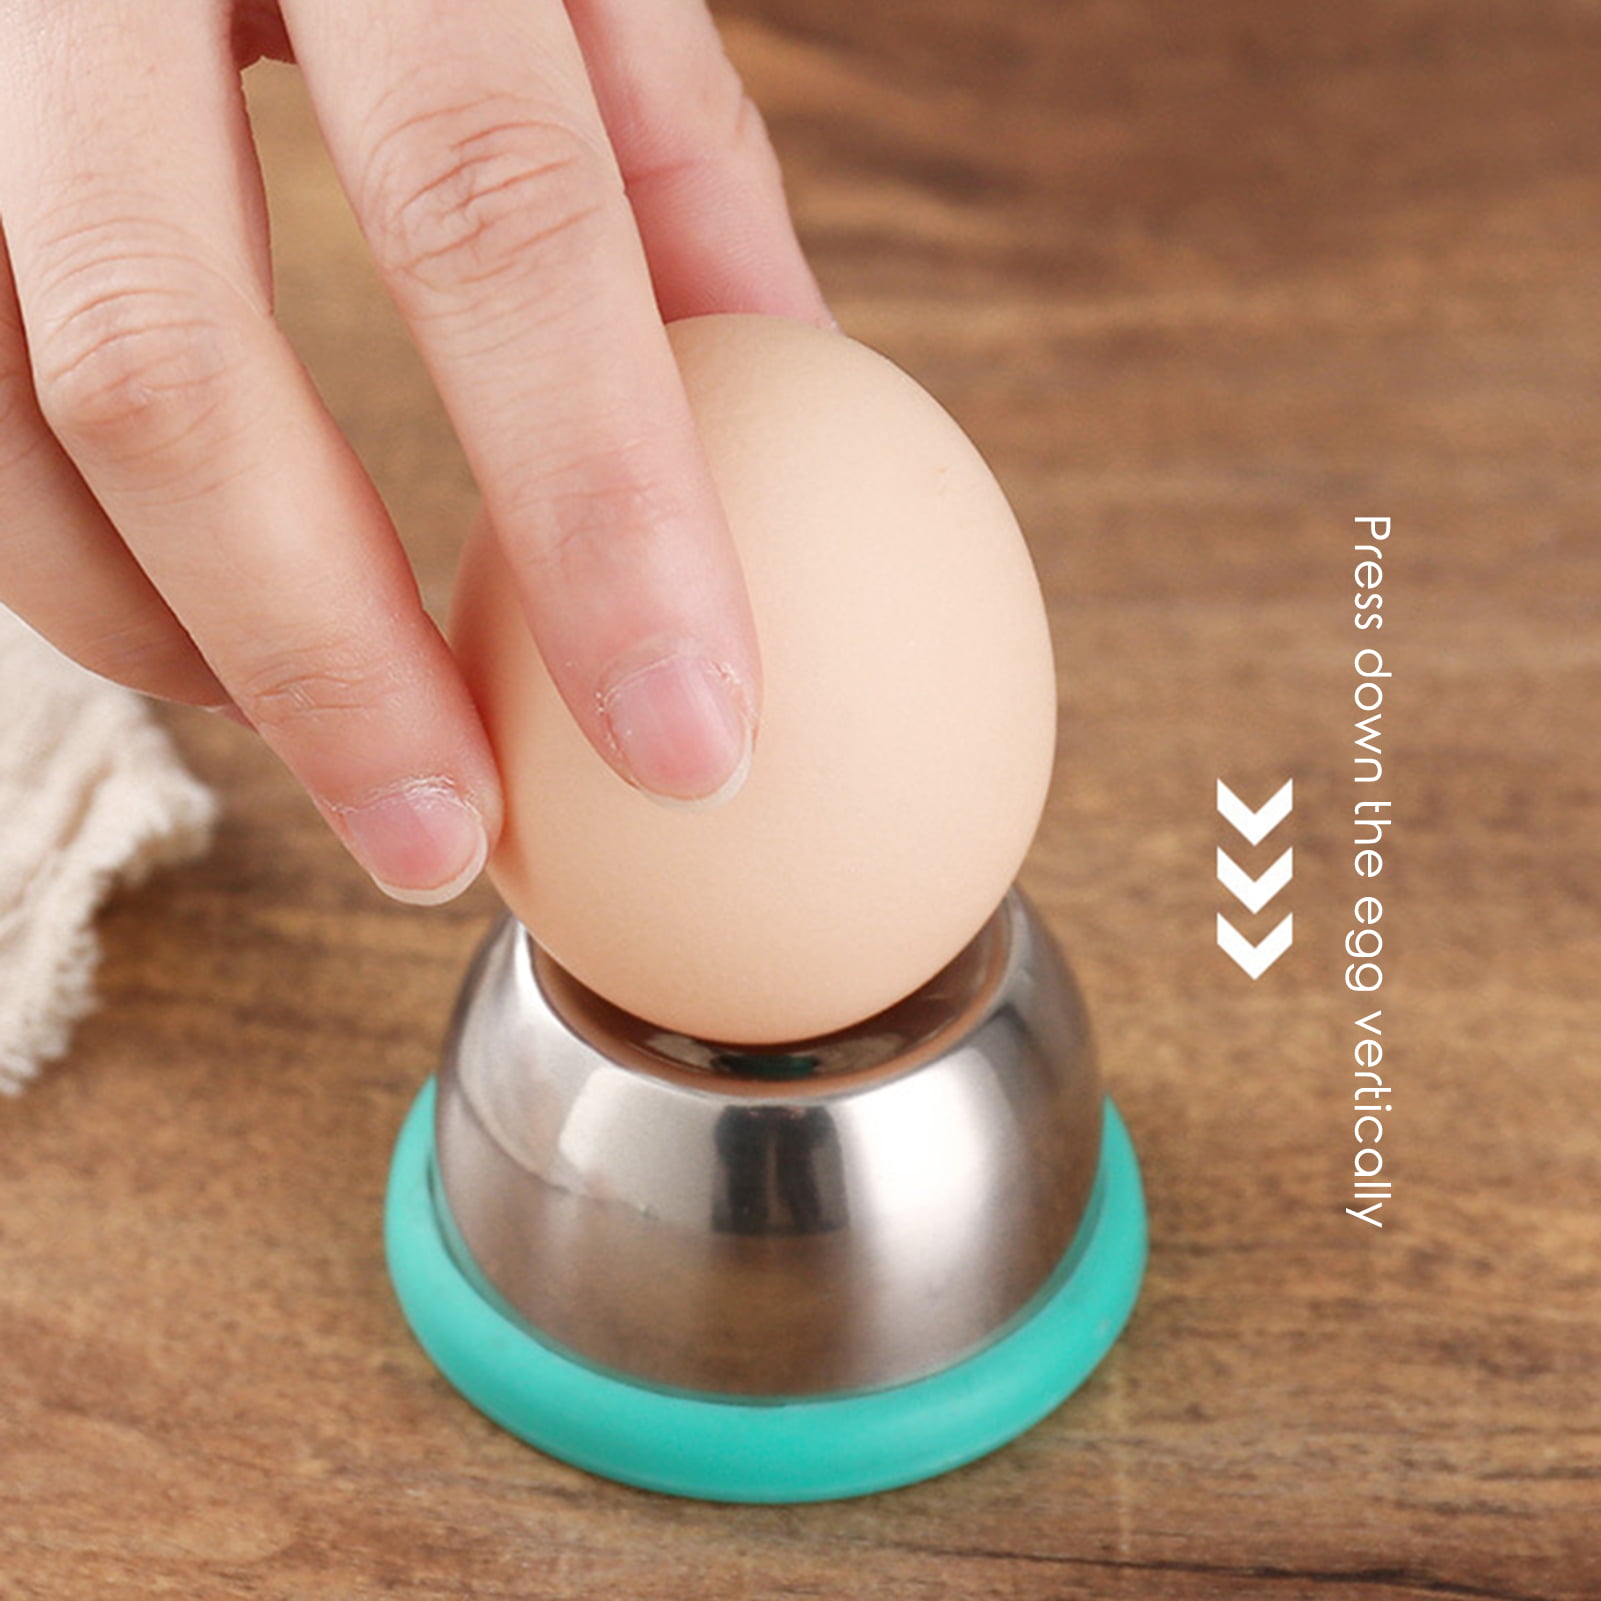 Stainless Steel Egg Picker, Semi-Automatic Egg Shell, Hole Beat